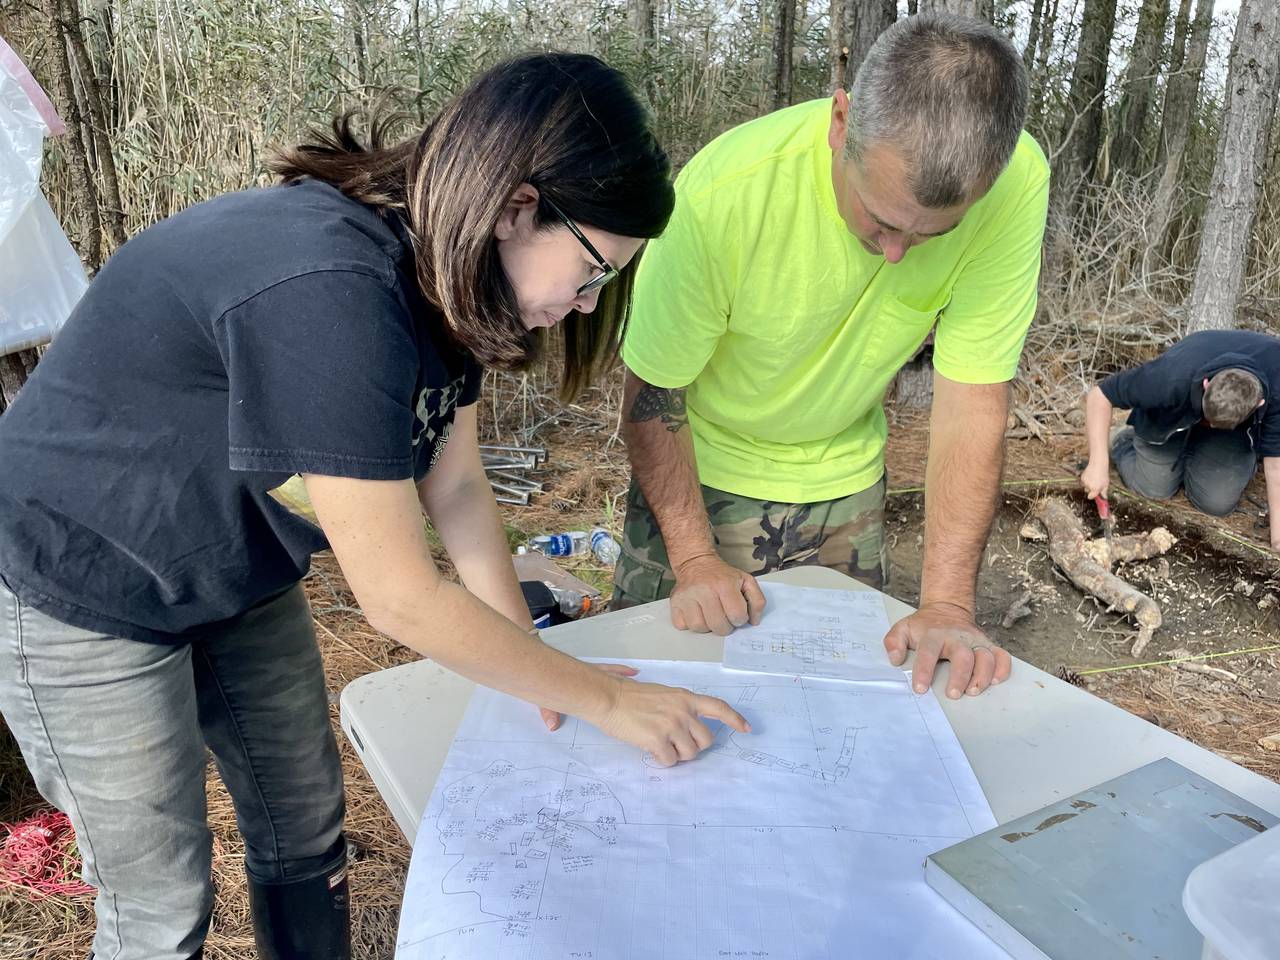 MDOT archaeologists Julie Schablitsky and Aaron Levinthal examine a map to determine where to dig next at the site of Ben Ross’ cabin.